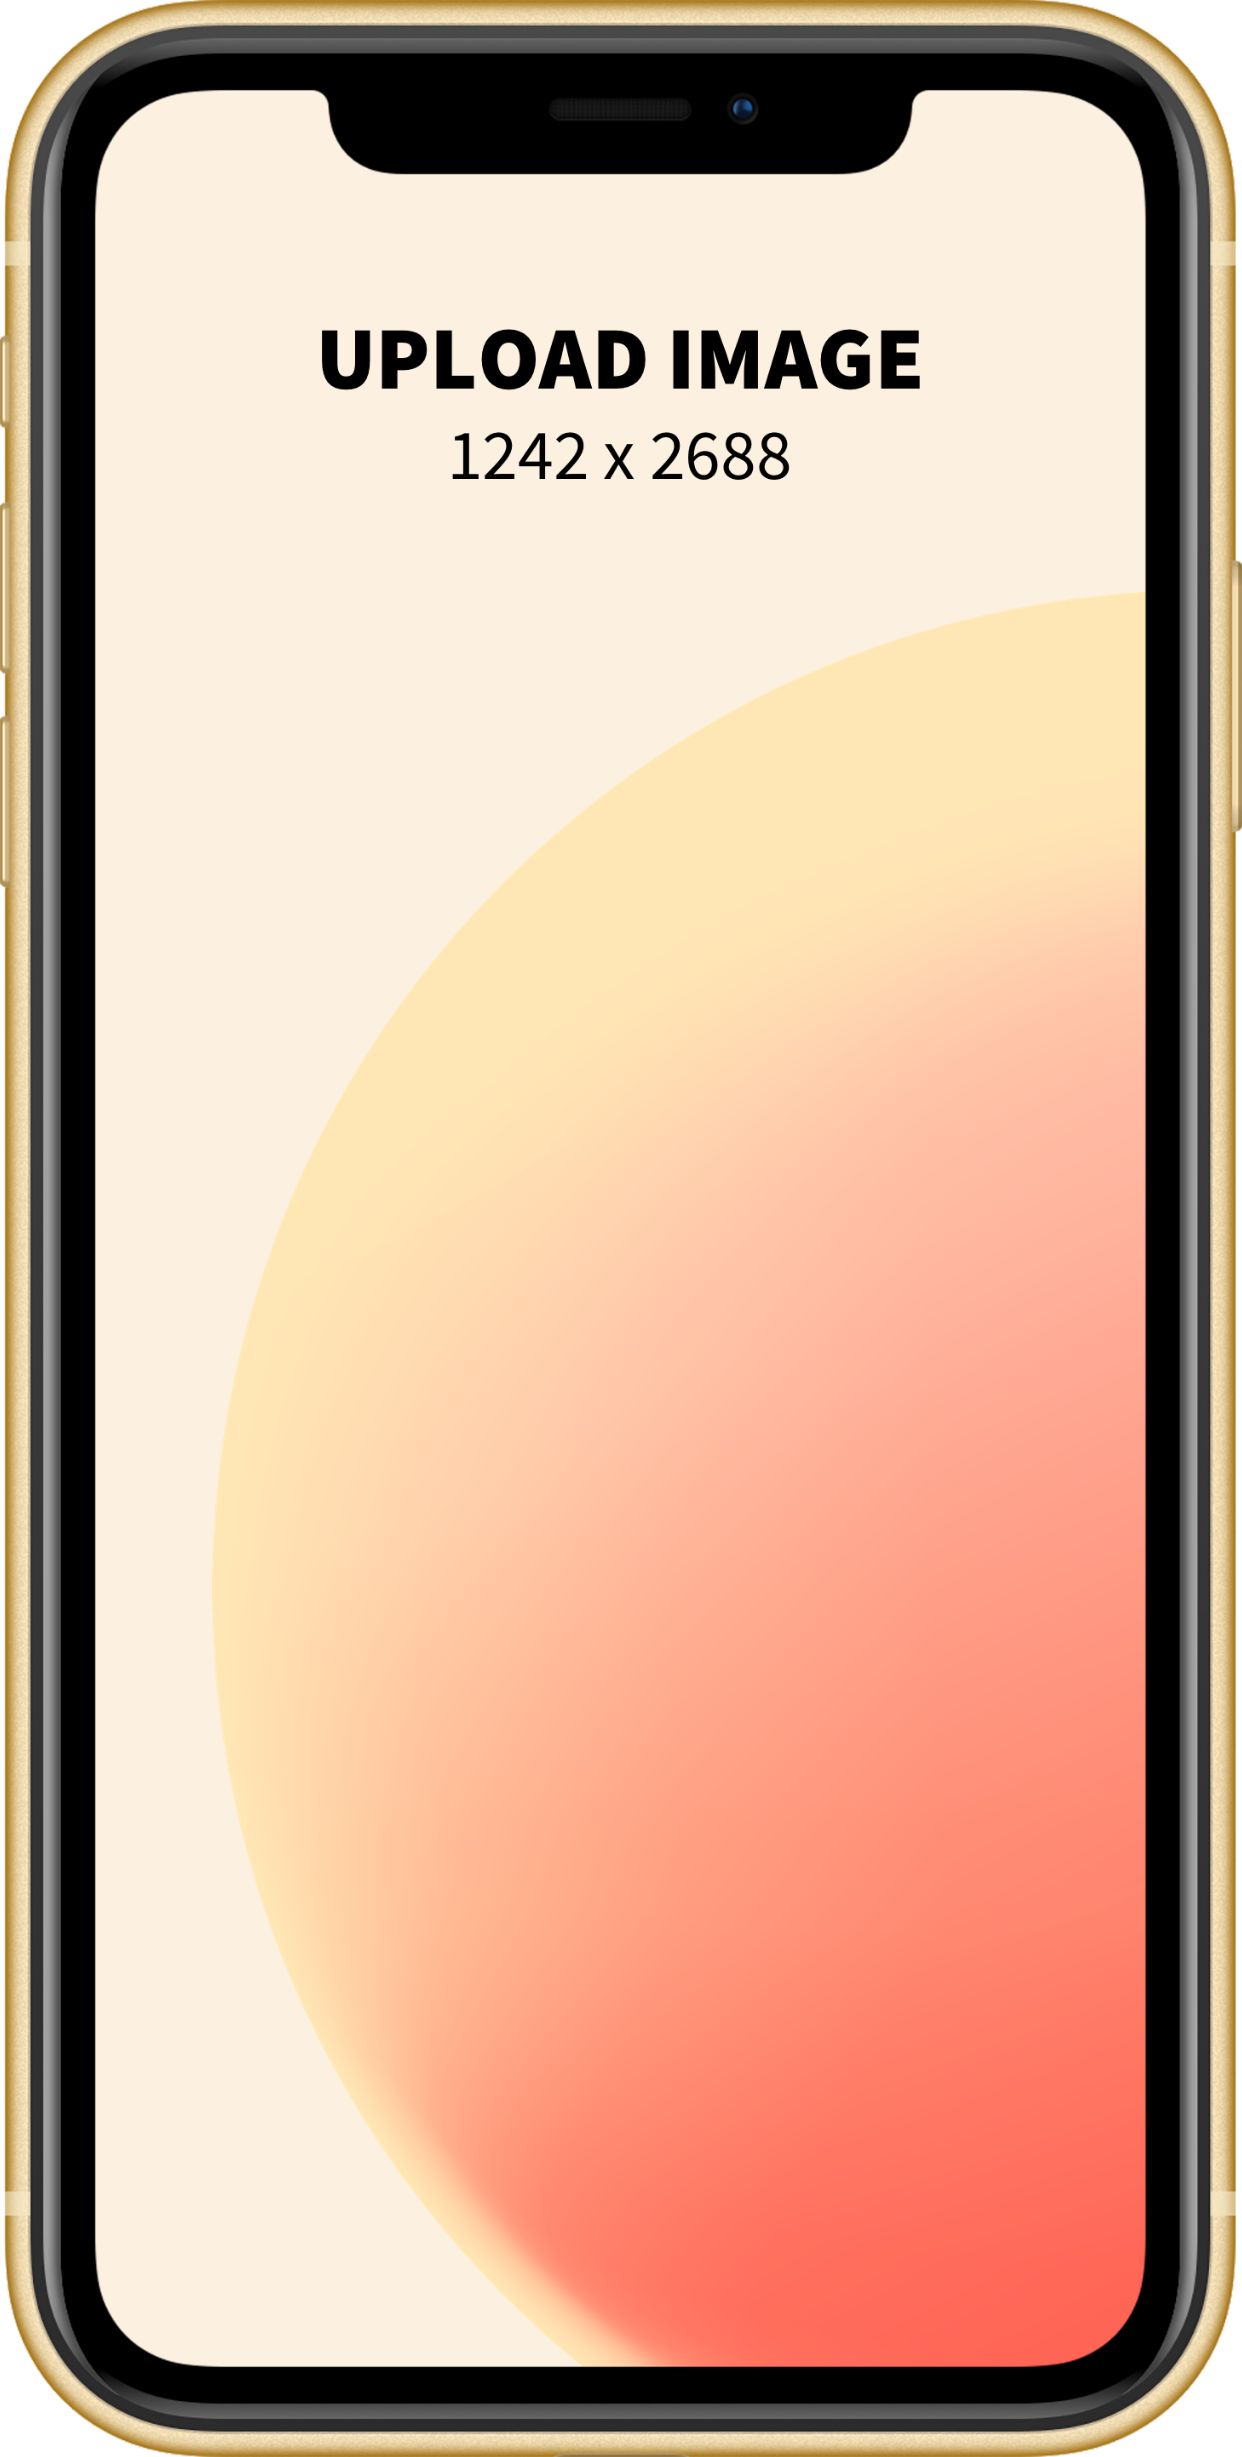 iPhone XS Max Mockup 2 template. Quickly edit fonts, text, colors, and more for free.